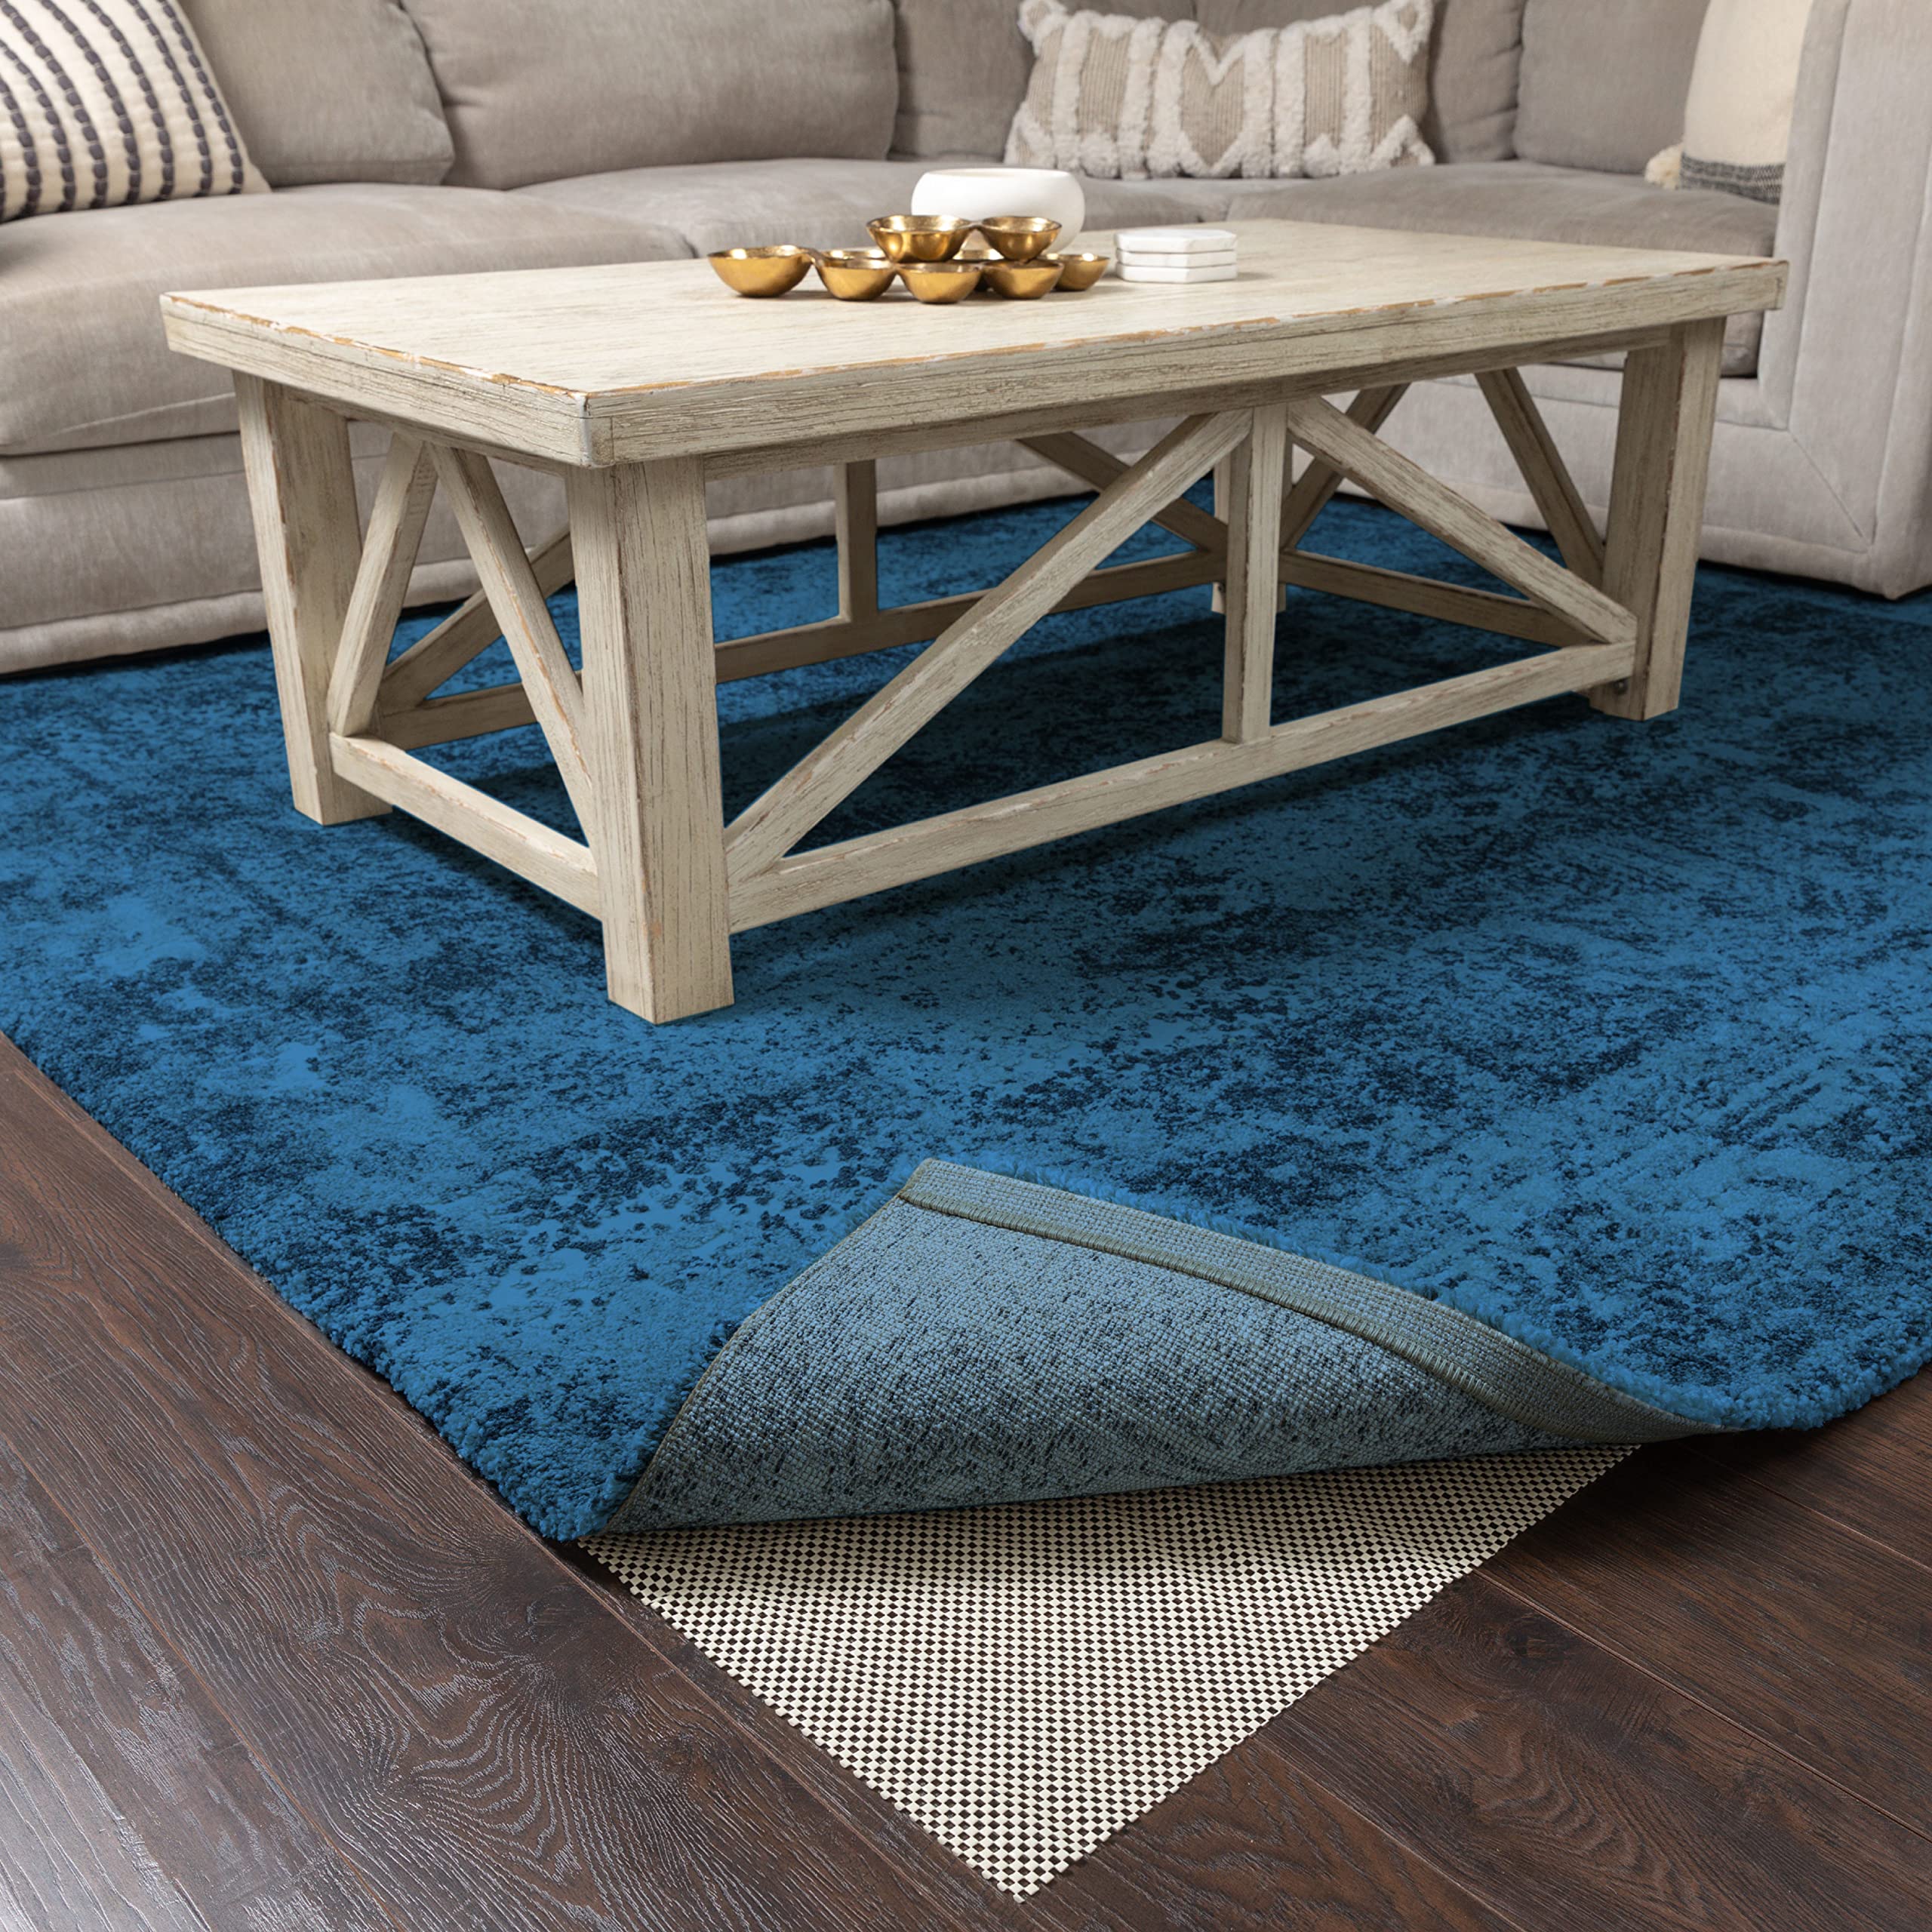 Non-slip Rug Pad For Hardwood And Carpet - Keep Your Rugs Safe And